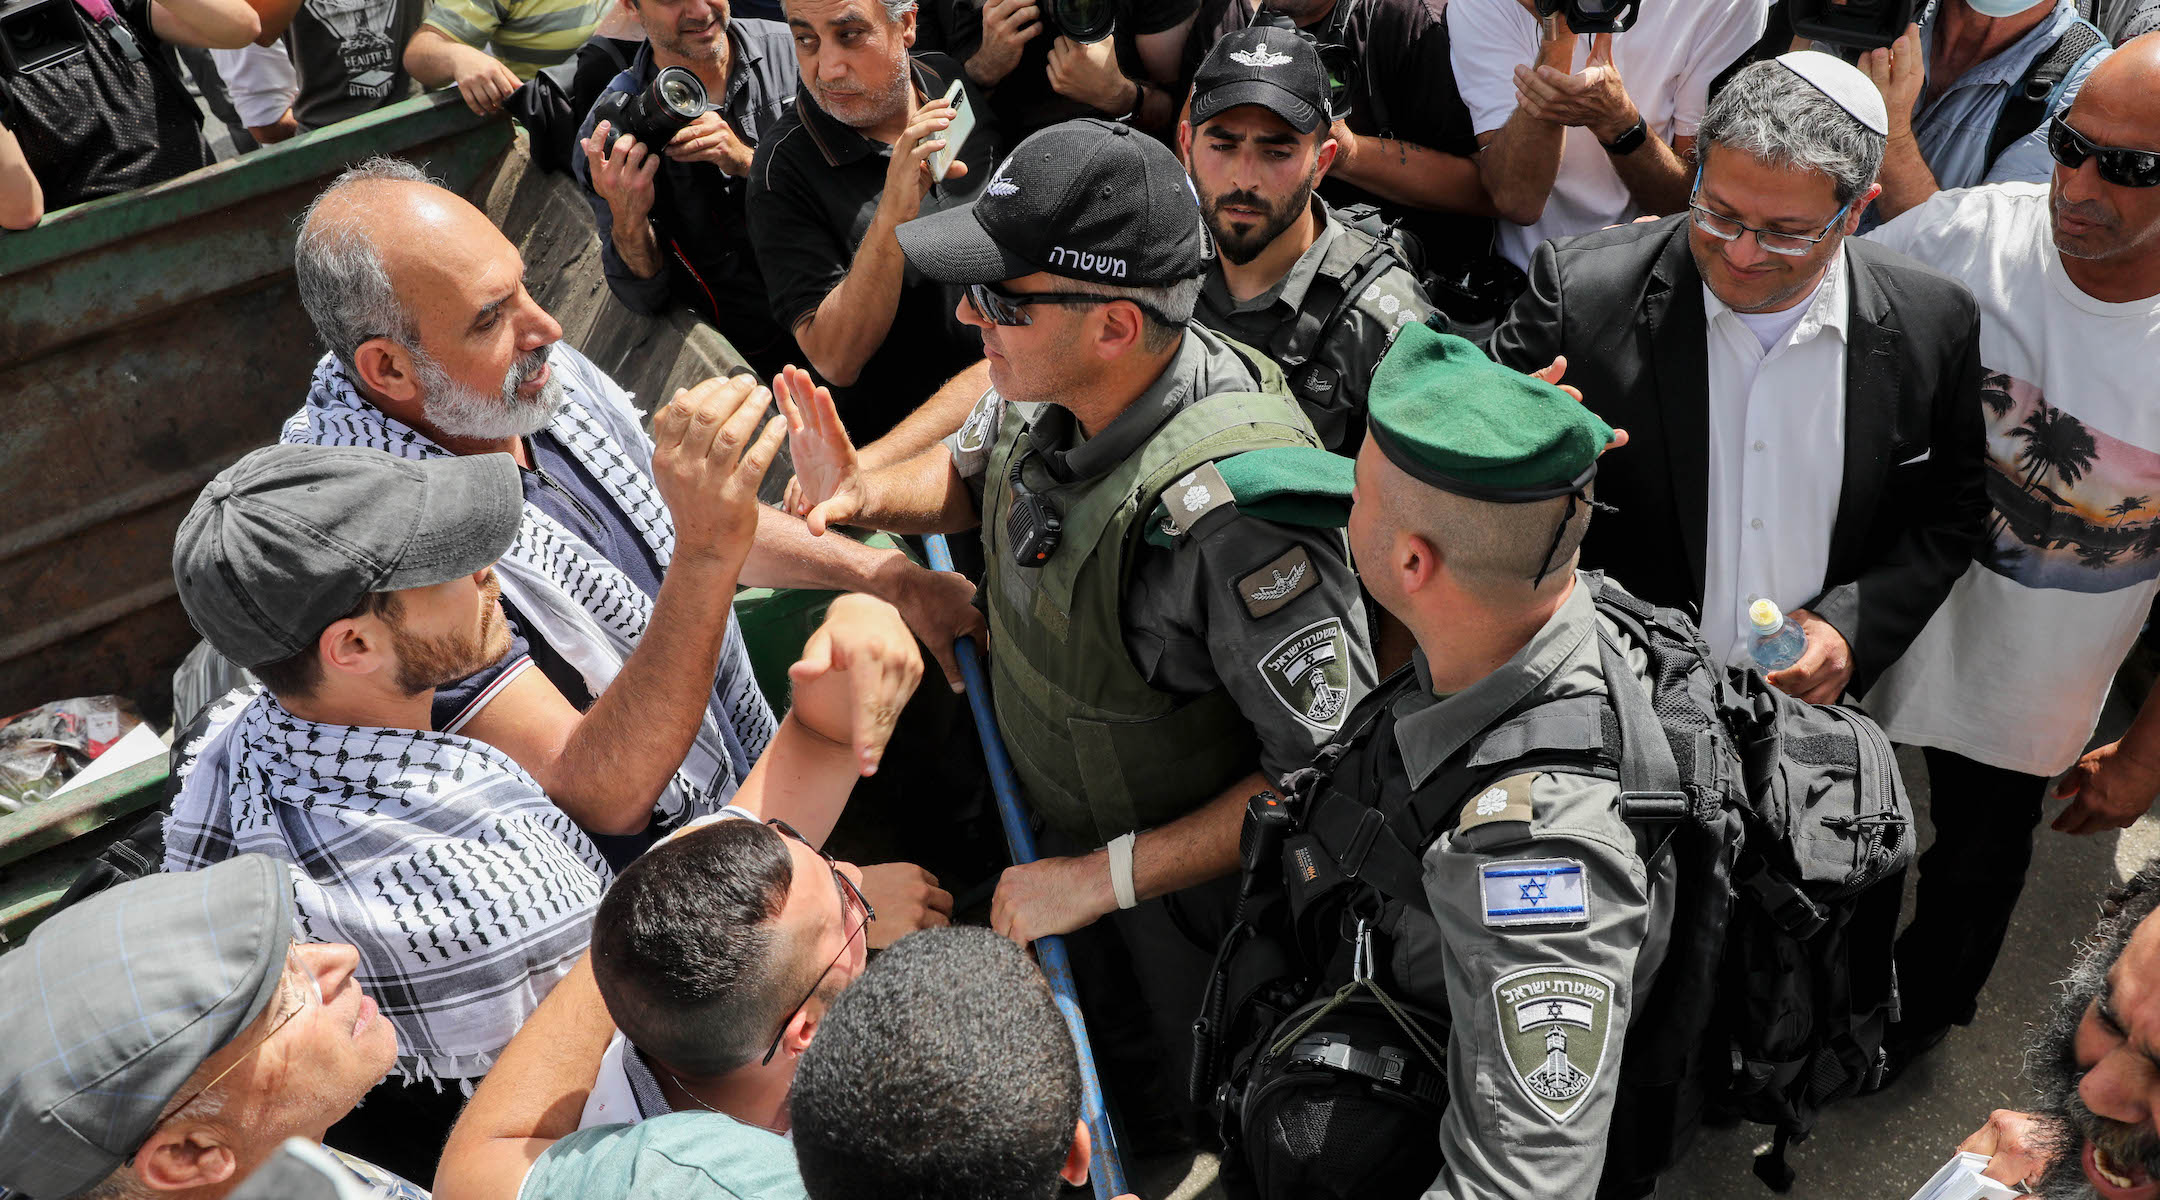 Israeli security forces clash with protesters during a protest against Israel's plan to evict Palestinians from the eastern Jerusalem neighborhood of Sheikh Jarrah on May 10, 2021. Itamar Ben-Gvir, a far-right Israeli lawmaker, is at right wearing a white kippah. (Olivier Fitoussi/Flash90)